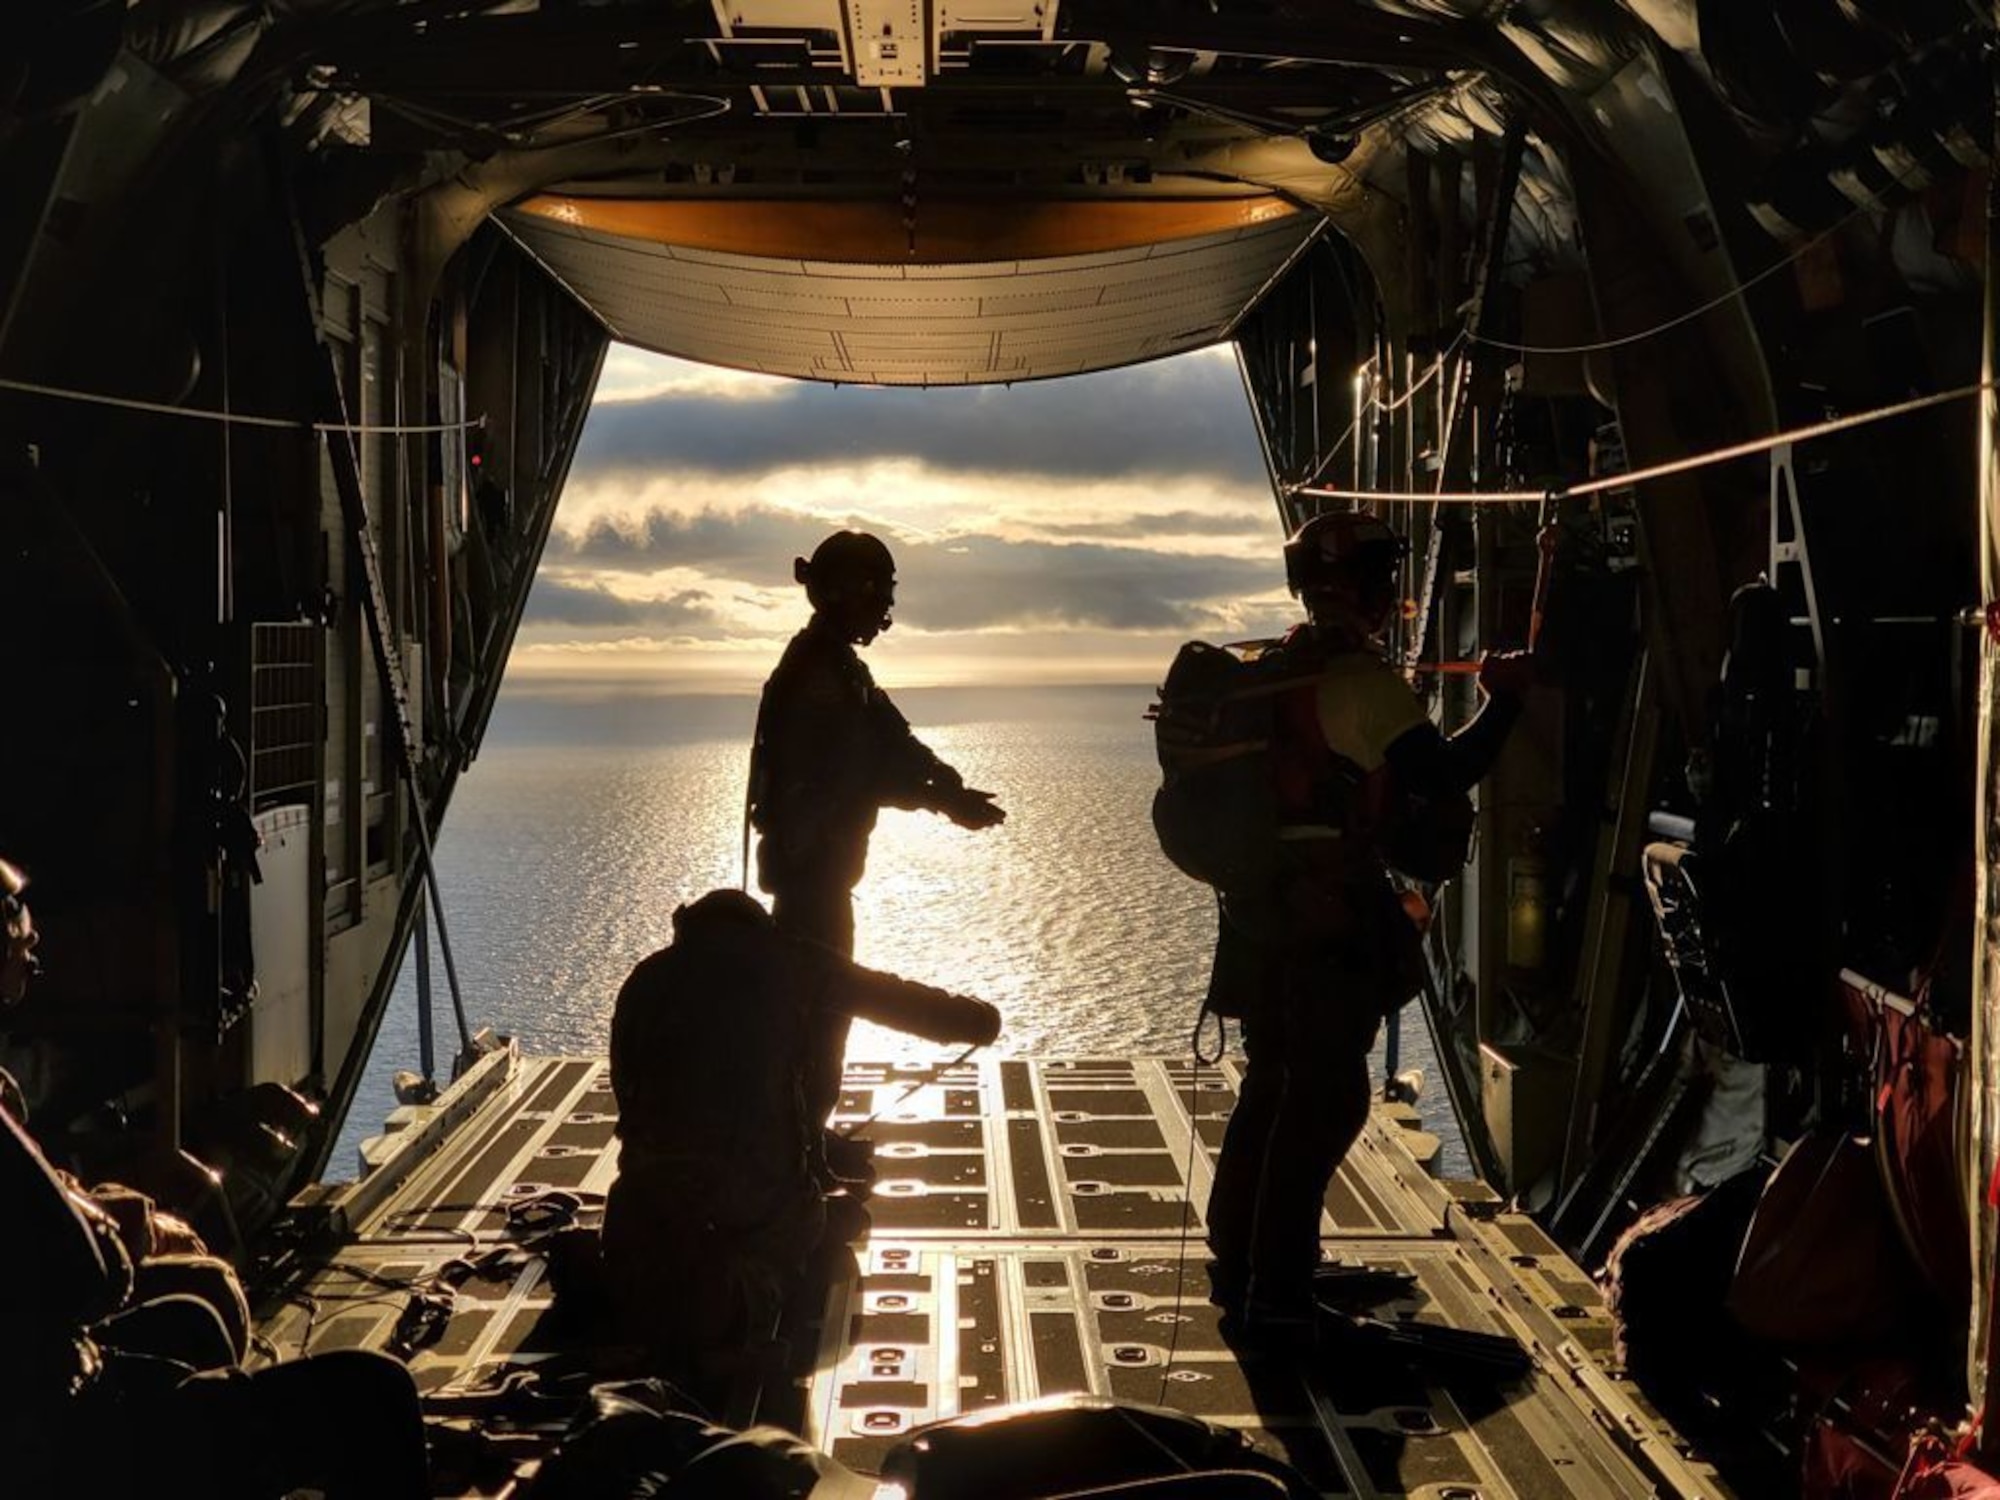 Pararescue Airmen assigned to the New York Air National Guard’s 106th Rescue Wing prepare for a jump into the Atlantic near the Azores during ASEREX 2021, a NATO search and rescue exercise held at the end of July, 2021. The 106th Rescue Wing sent an HH-130 search and rescue aircraft and pararescue jumpers to participate in the training. (Courtesy photo)